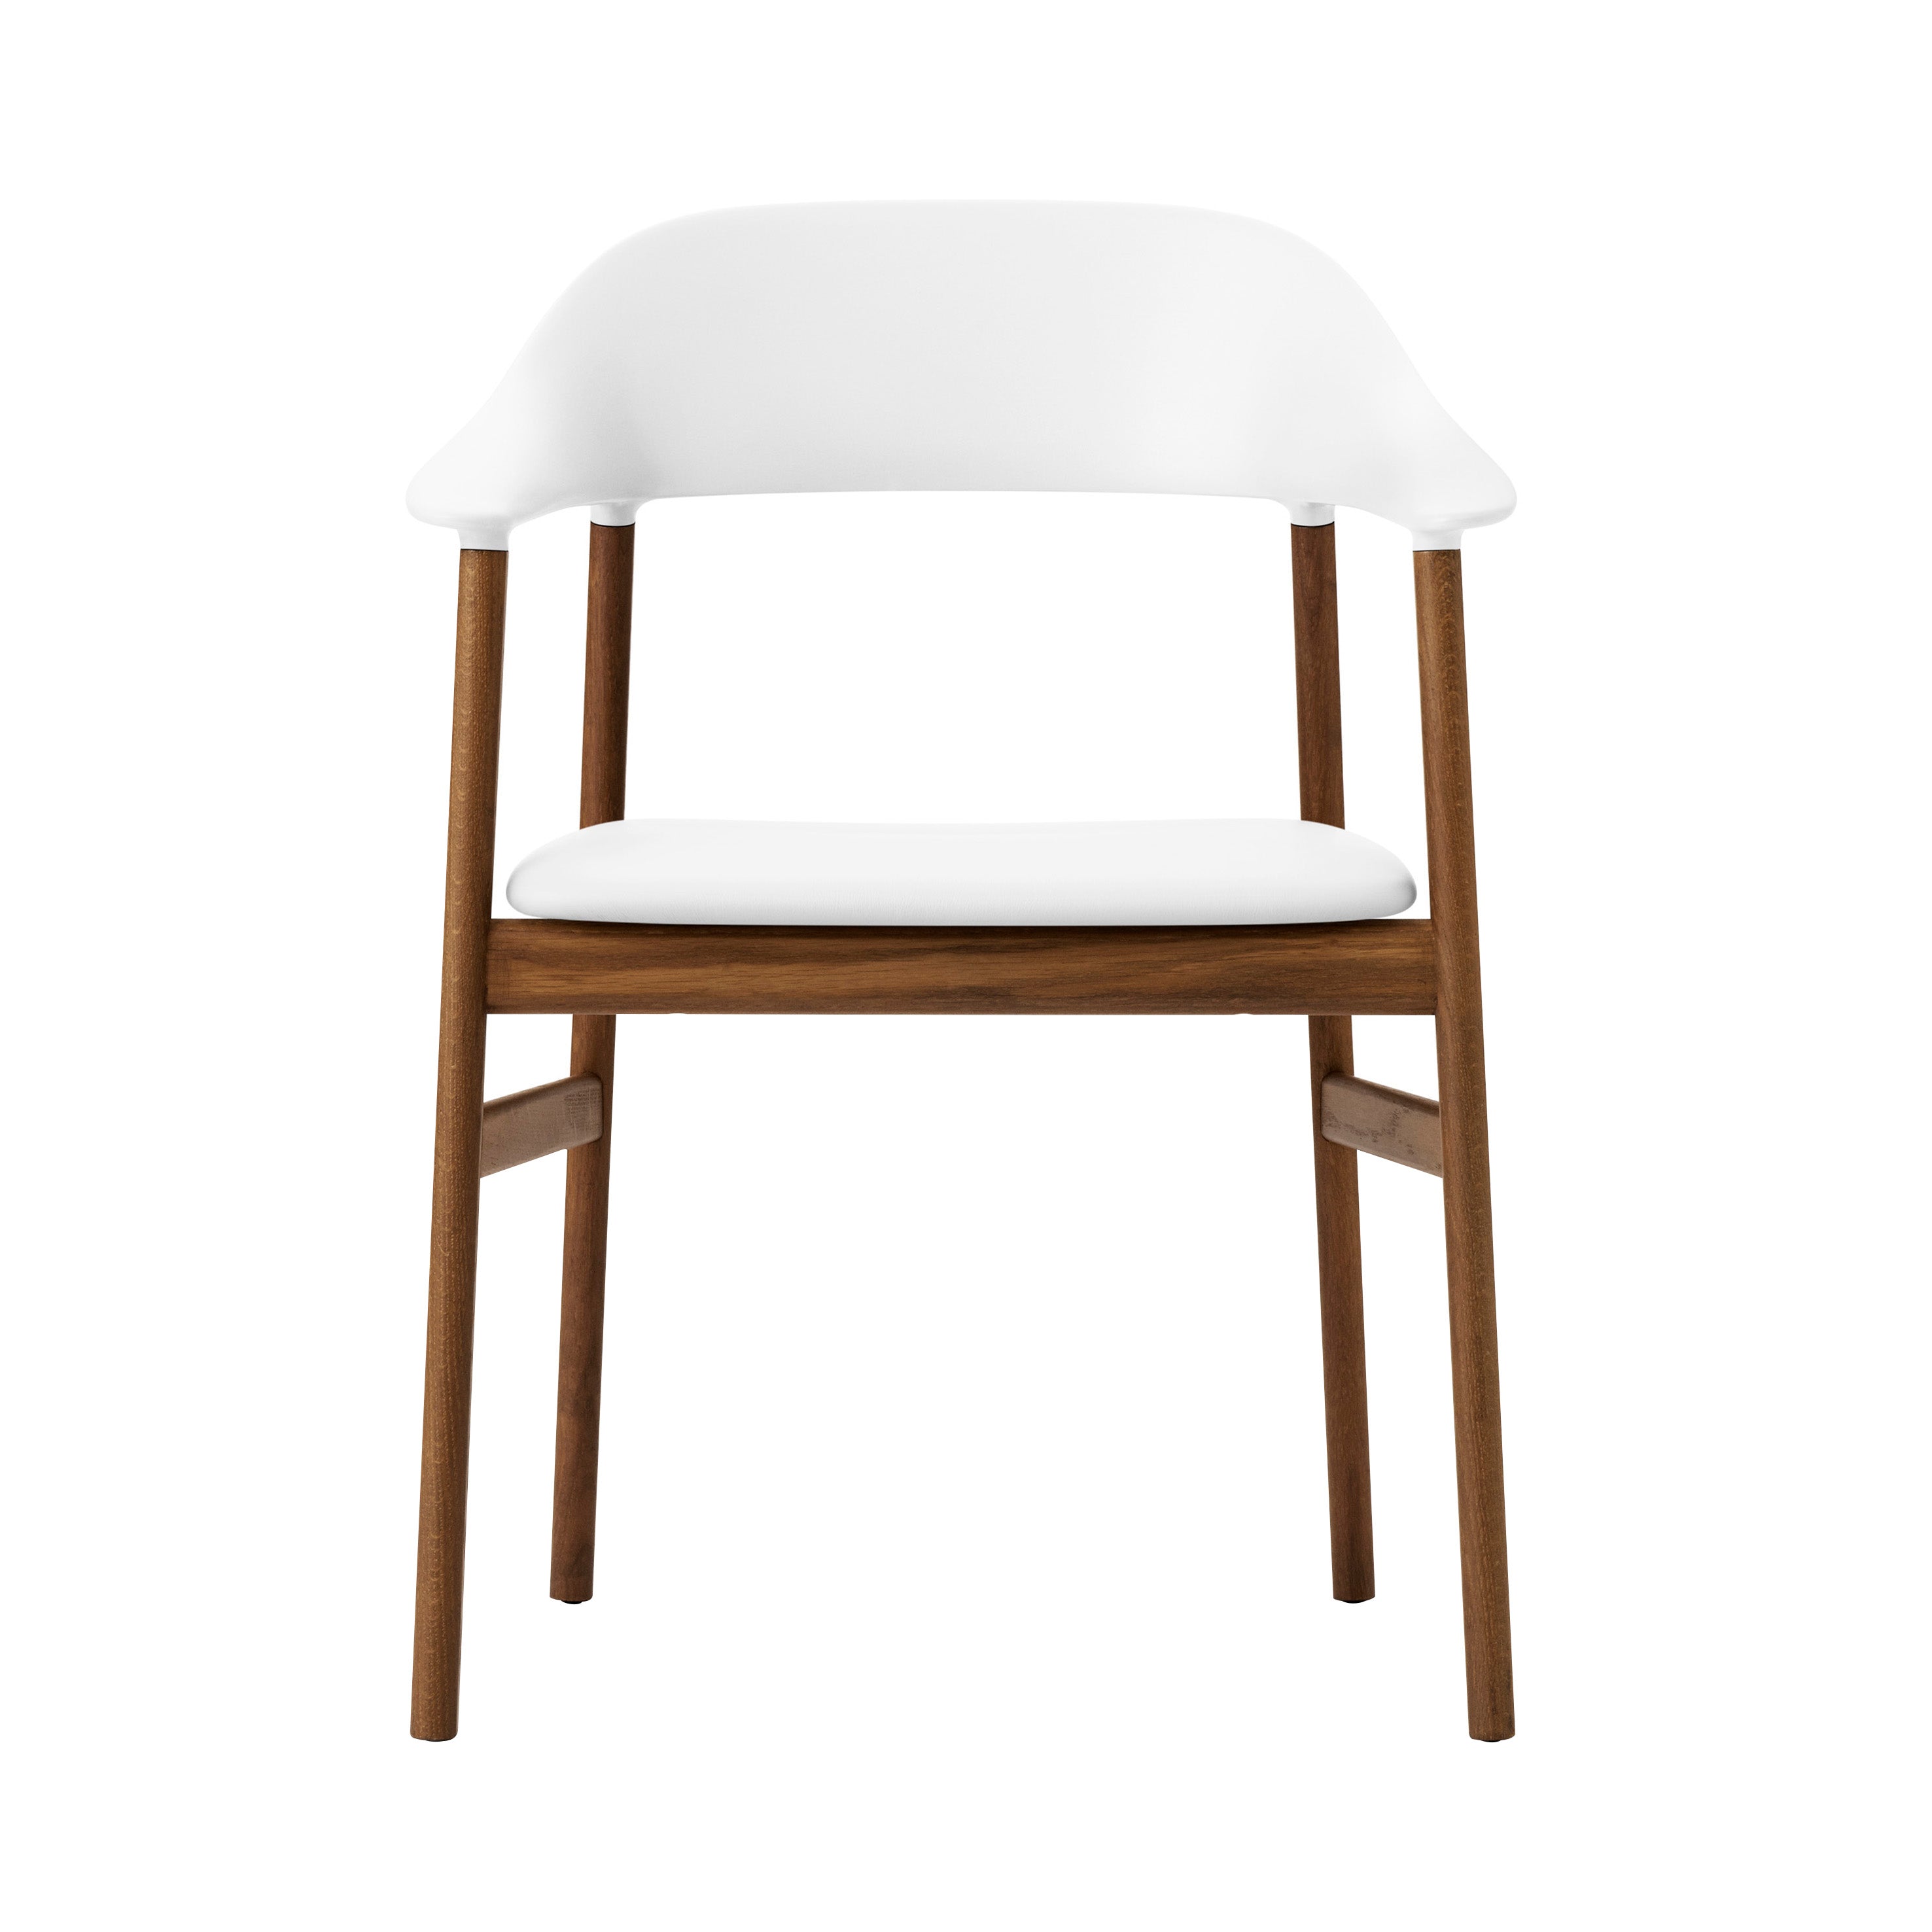 Herit Armchair: Upholstered + Smoked Oak + White + Spectrum Leather White